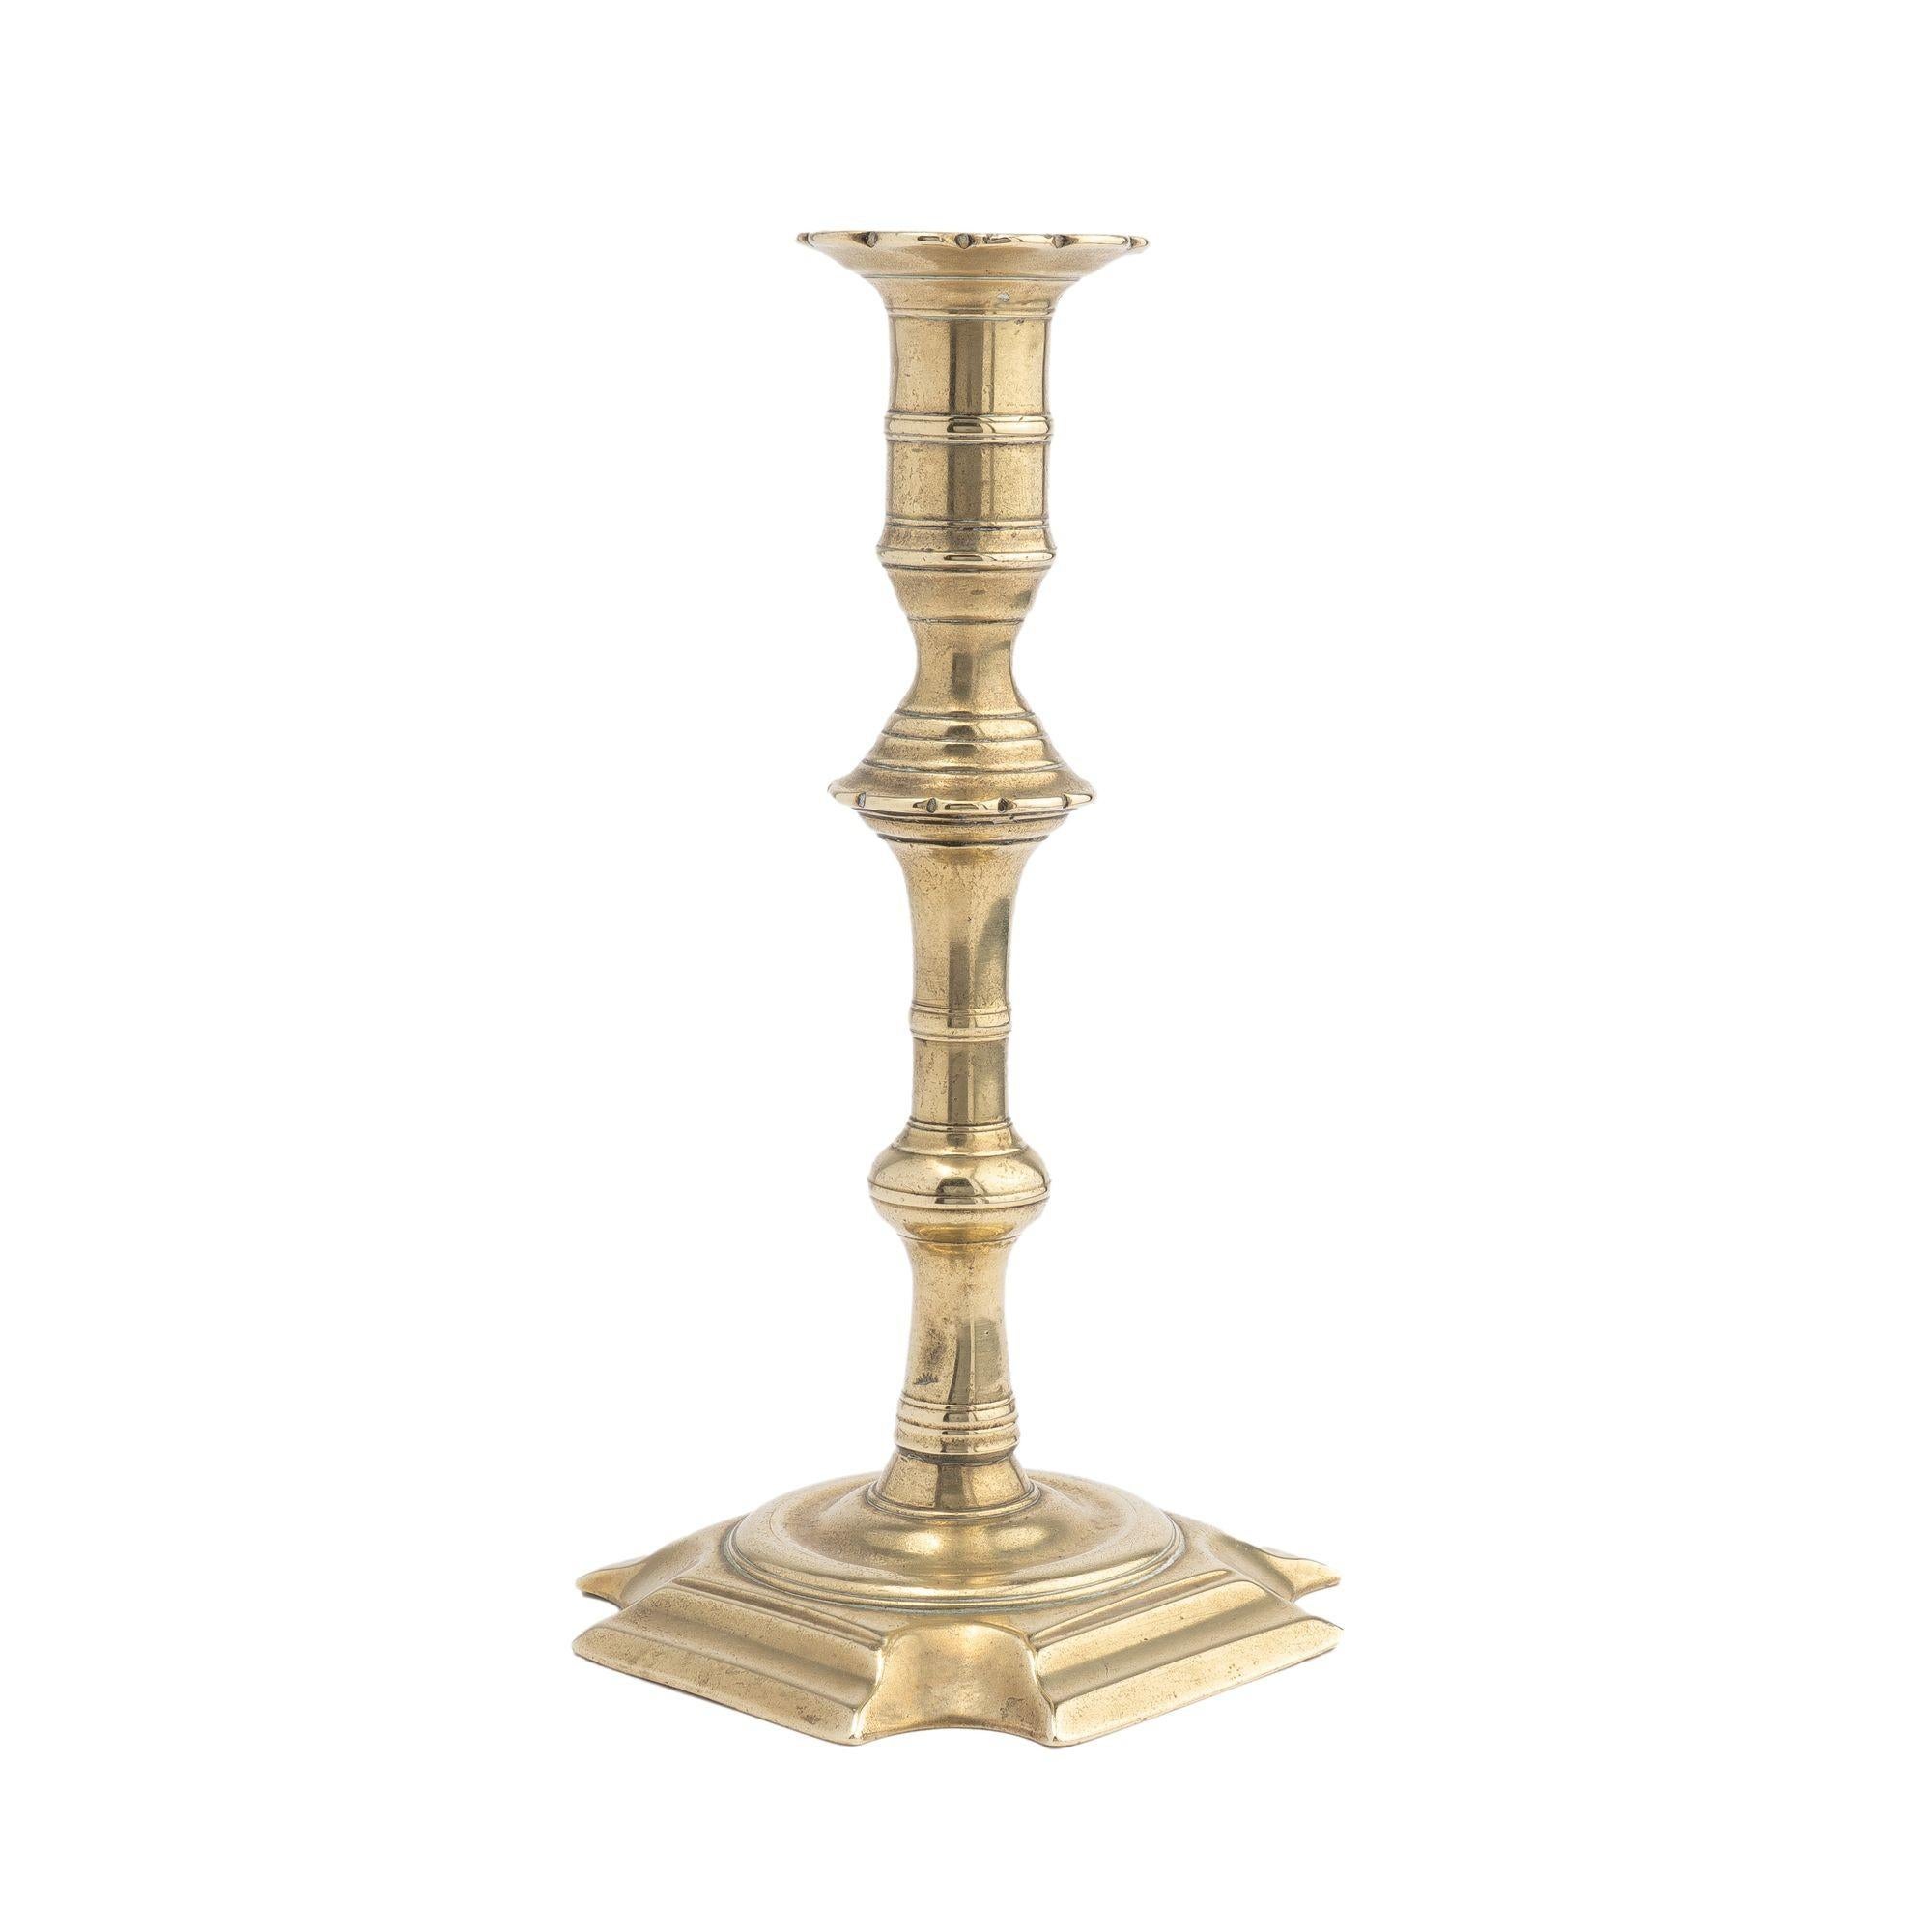 Core cast brass Queen Anne baluster candlestick. The candlestick is cast with a scolloped edge bobeshe and tall candle cup with bead moldings above a scolloped edge, knob beaded lower shaft, and lower knob. The base is a shallow square around a